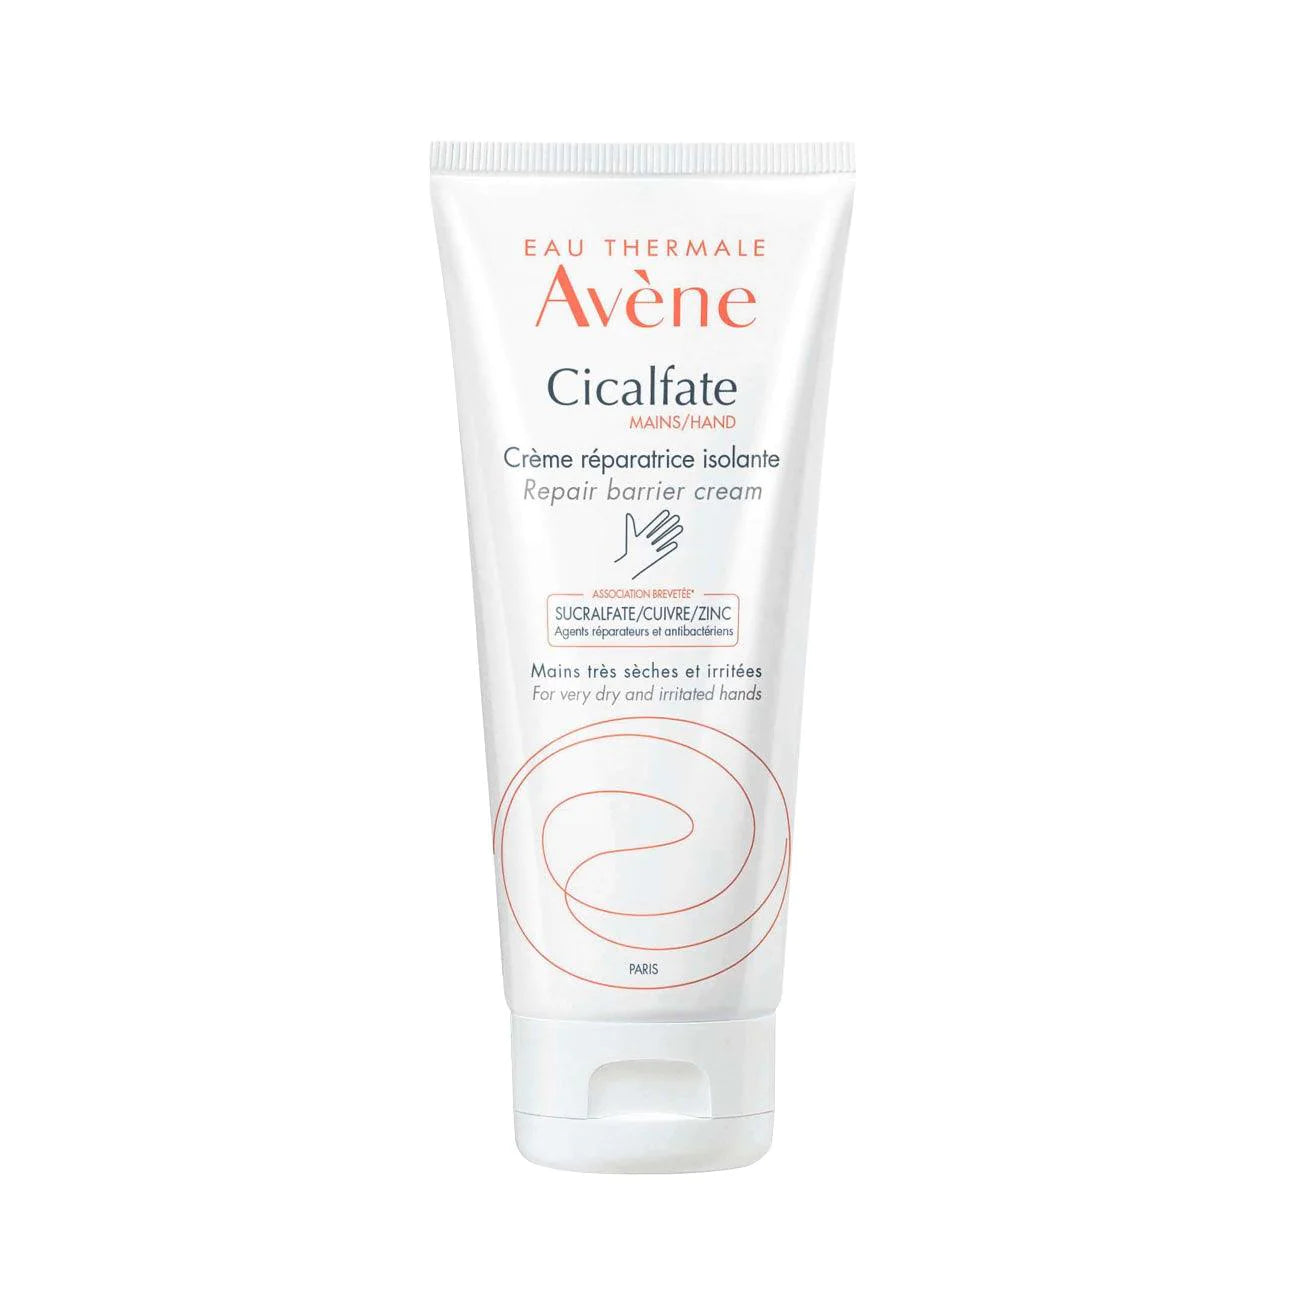 AVÈNE Cicalfate Hand Repair Barrier Cream - Very Dry and Irritated Hands